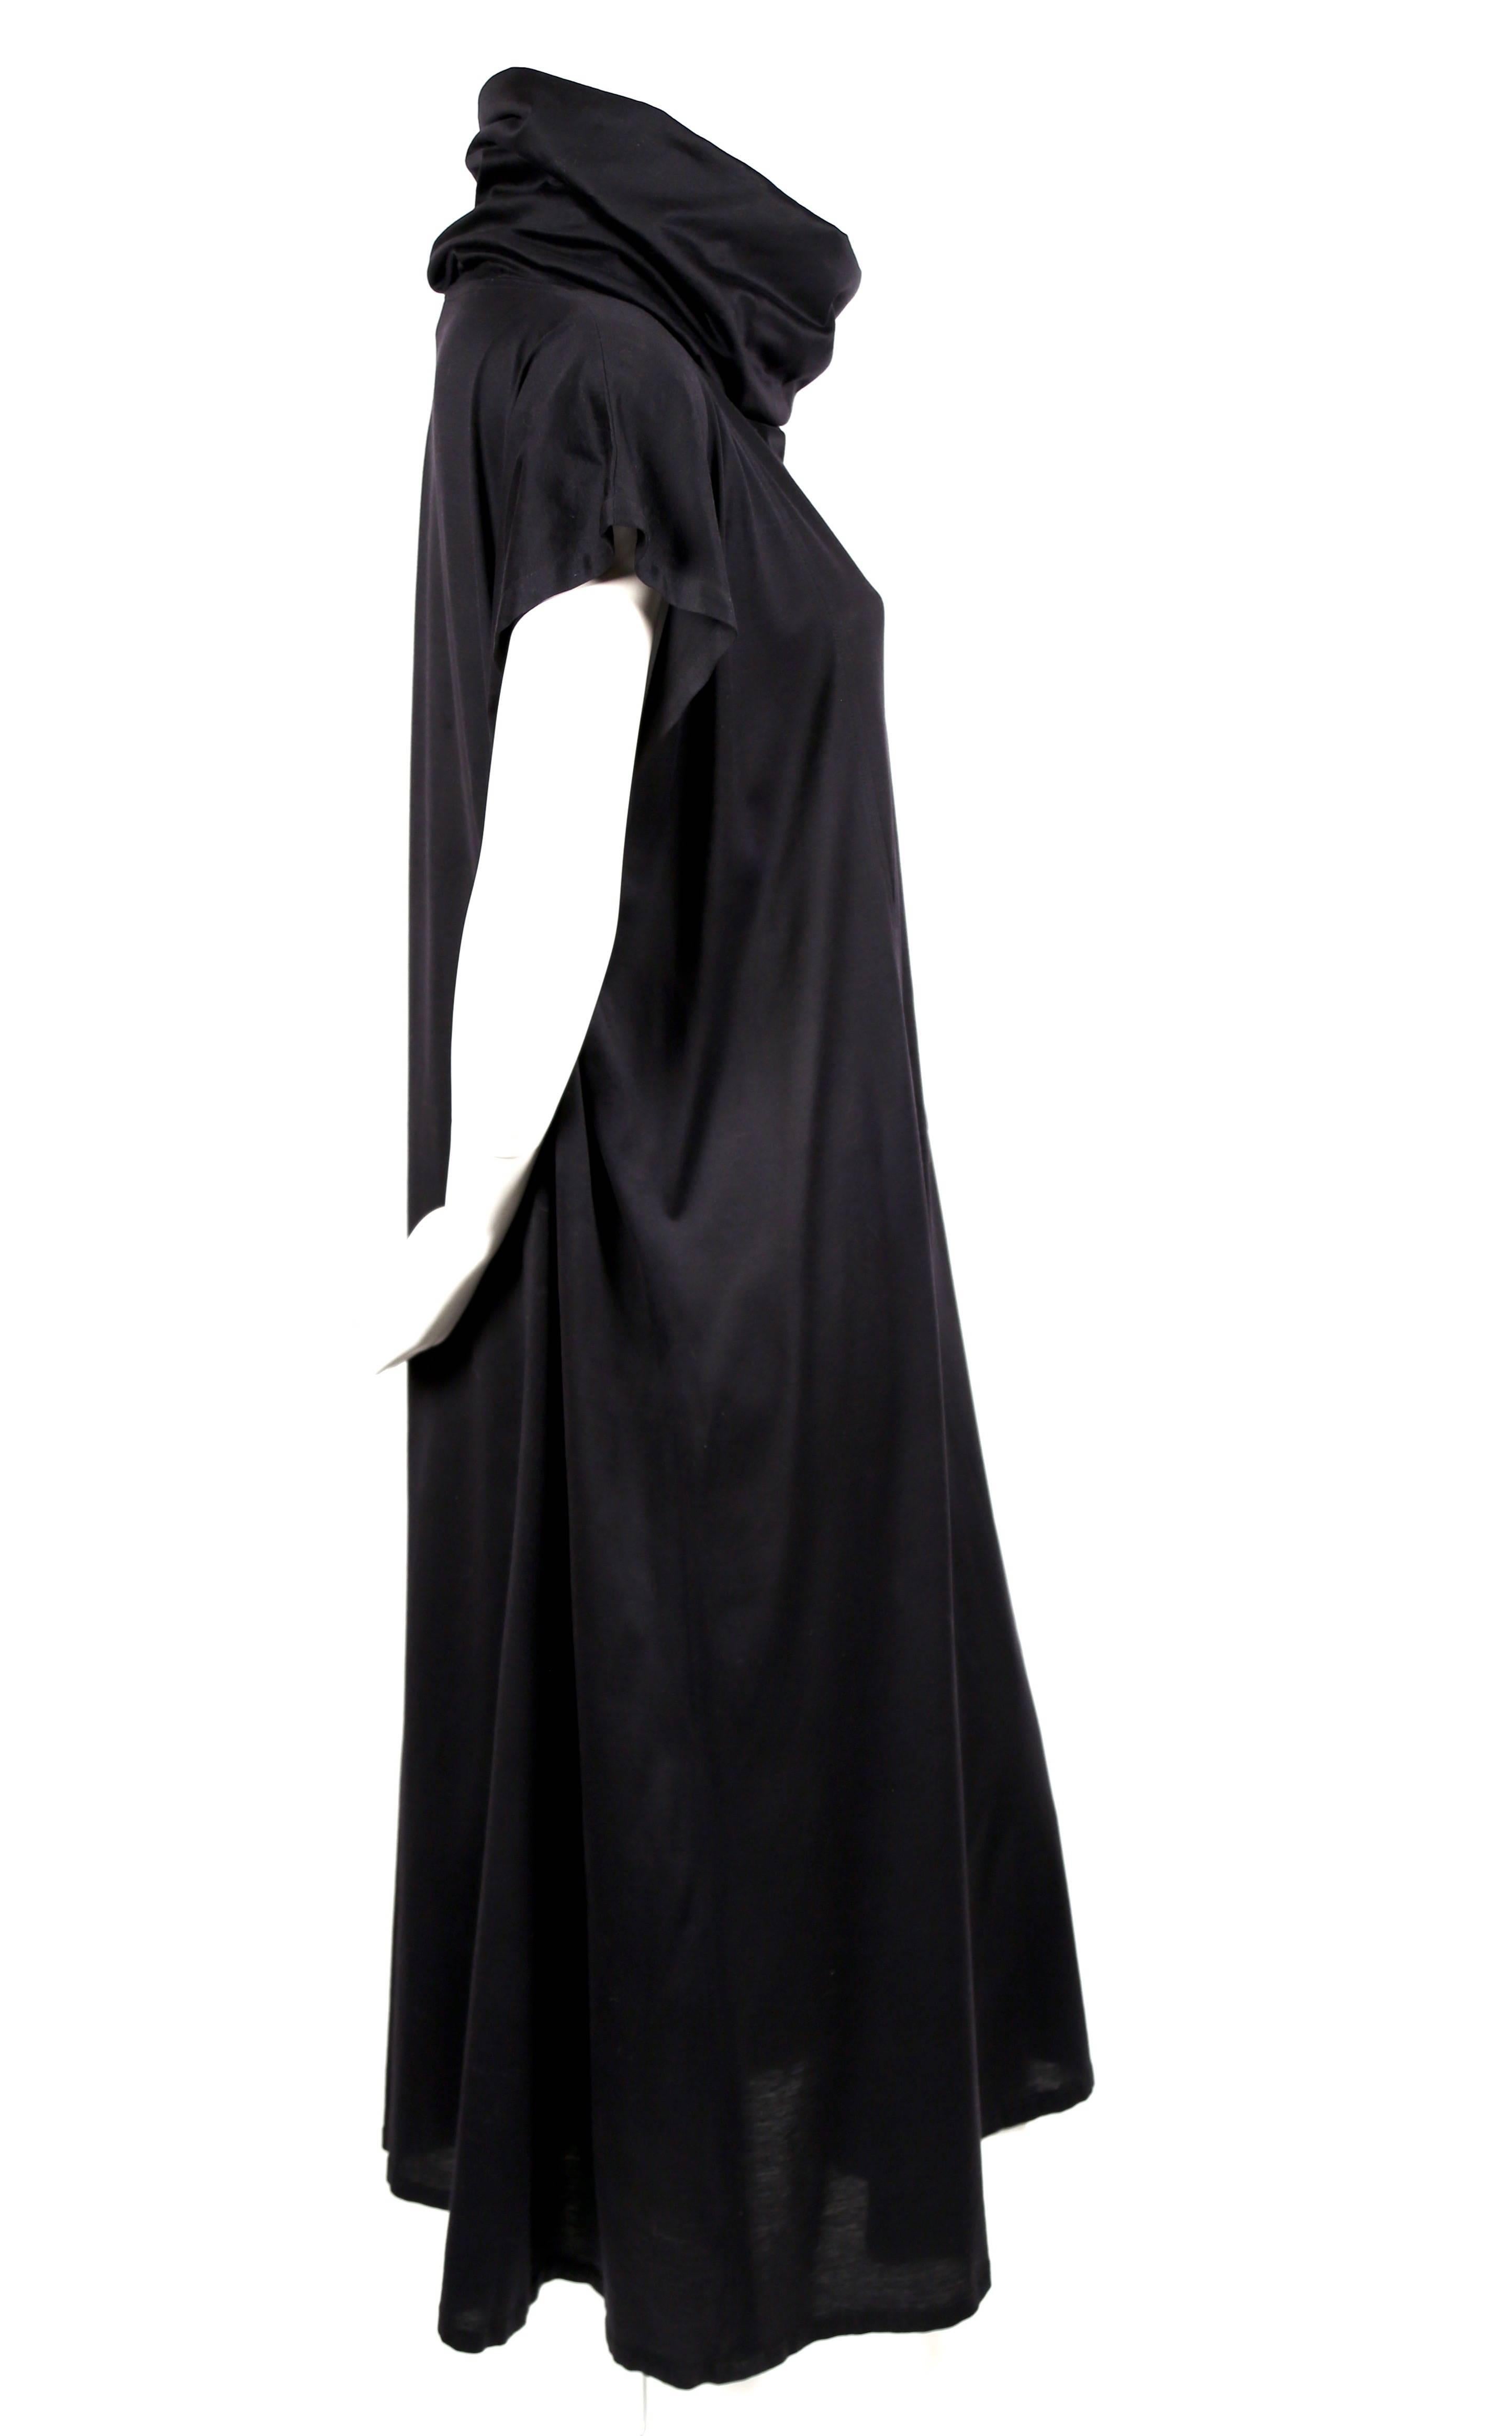 Jet black fine gauge cotton jersey dress with cowl neckline and angled patch pocket at front designed by Kenzo Takada dating to 1985 as seen on the spring summer runway. Dress is labeled a French size 36 however due to the loose cut it can